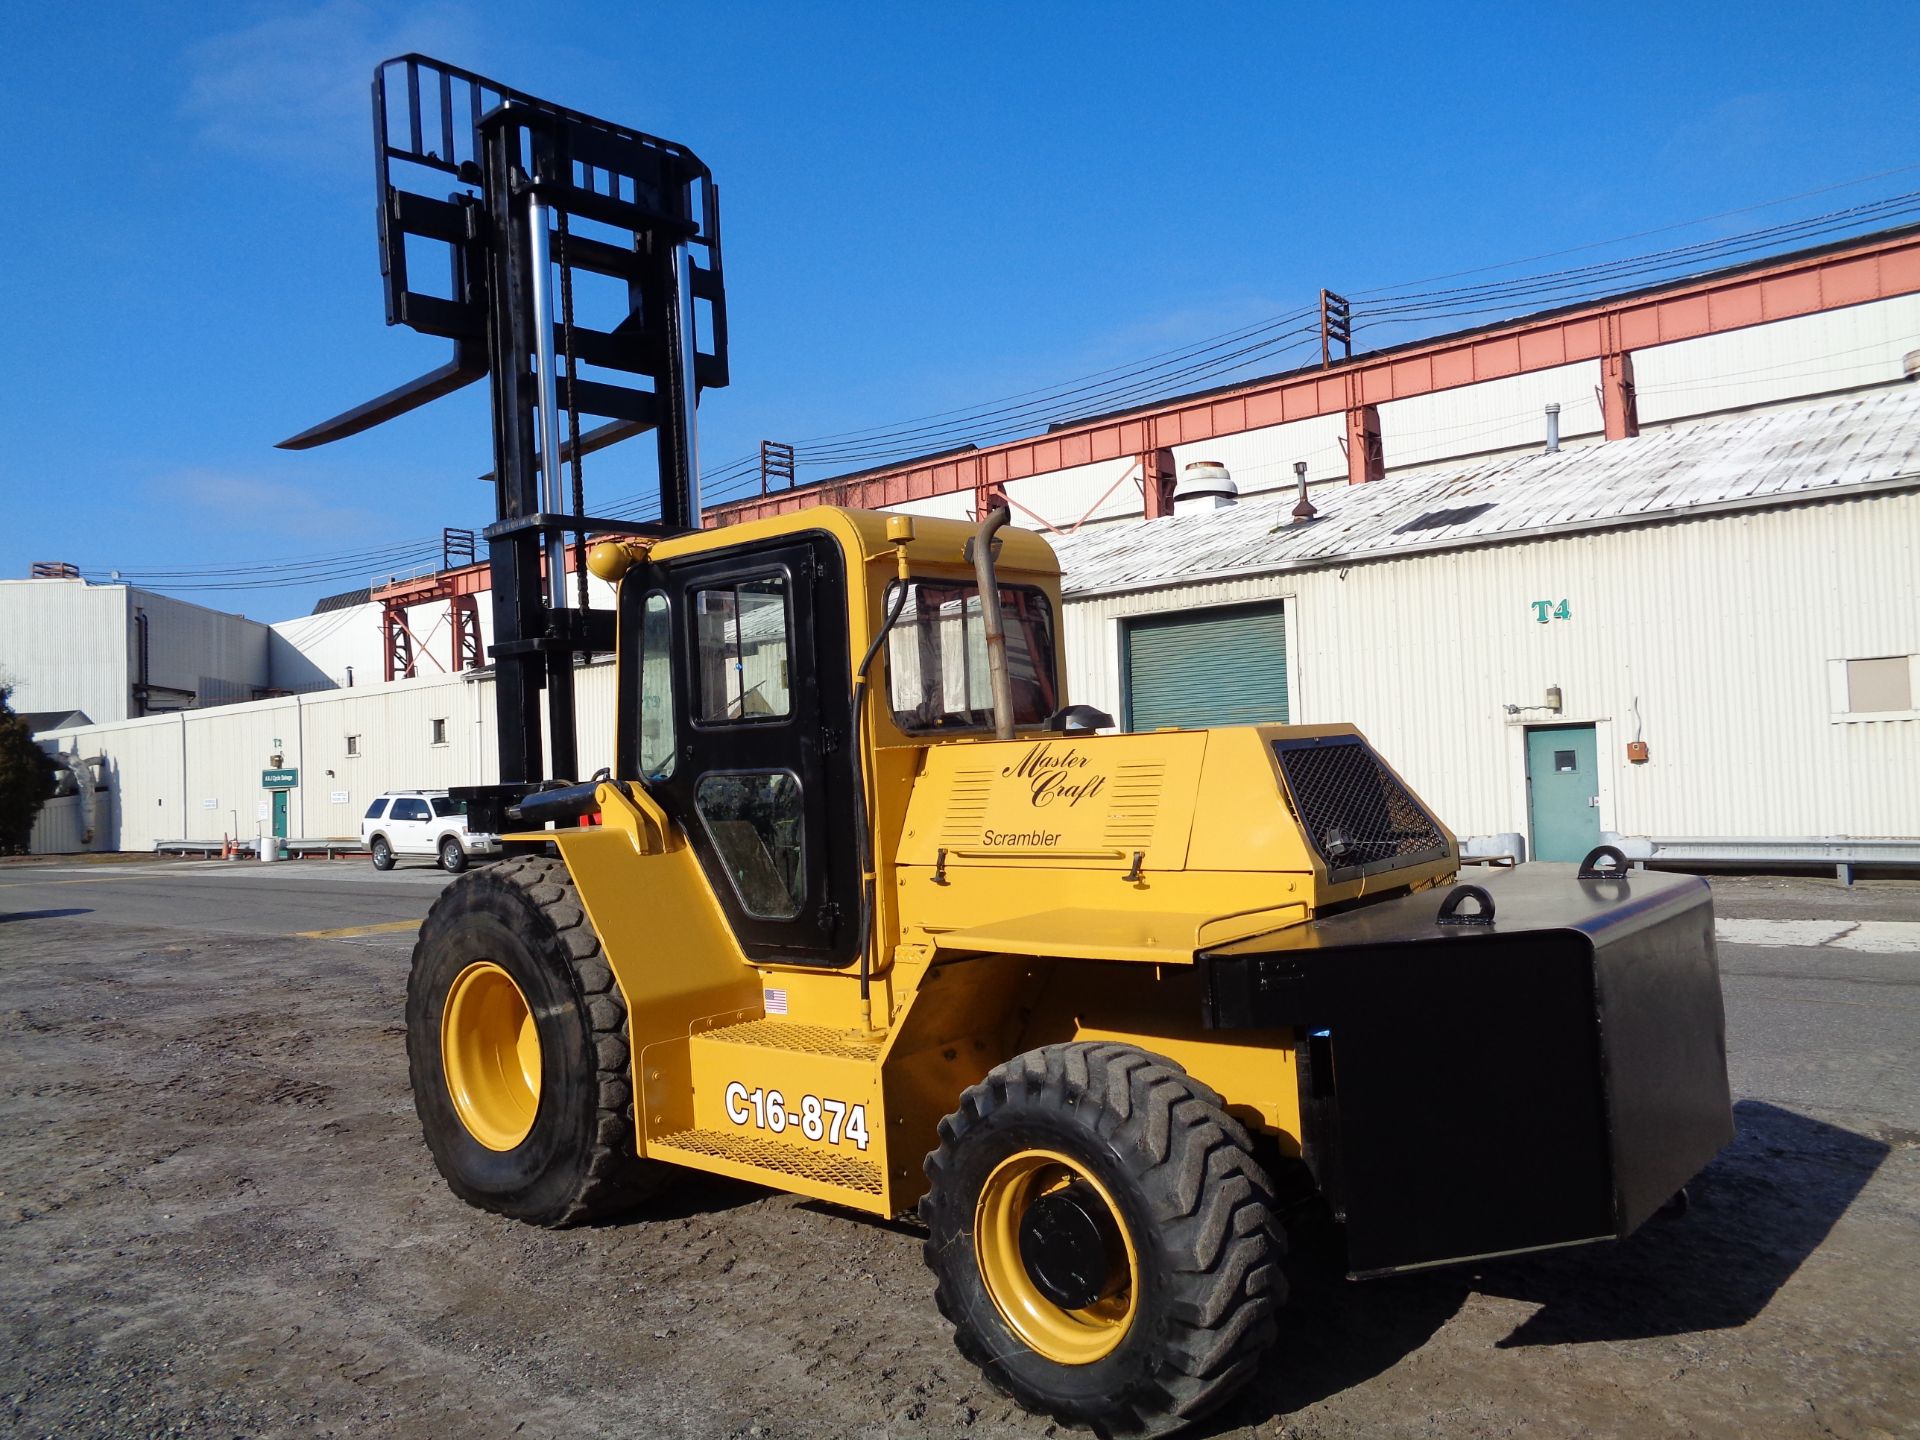 2008 Master Craft C16.874 16,000 lbs Rough Terrain 4x4 Forklift - Image 2 of 12